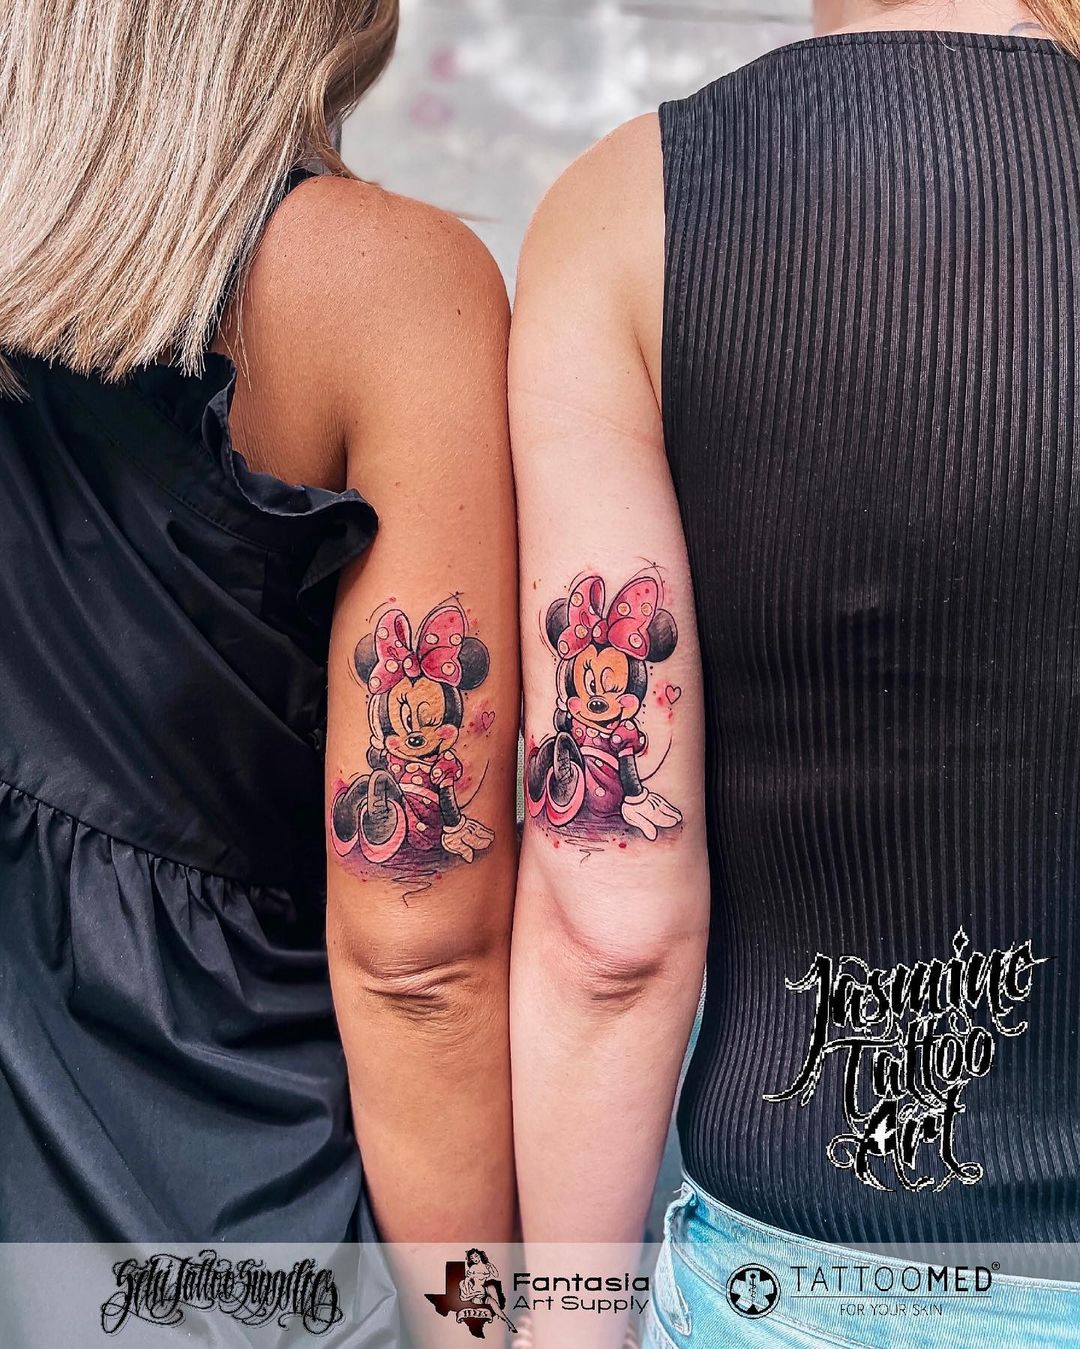 Ideas for best friend matching tattoos | Roll and Feel